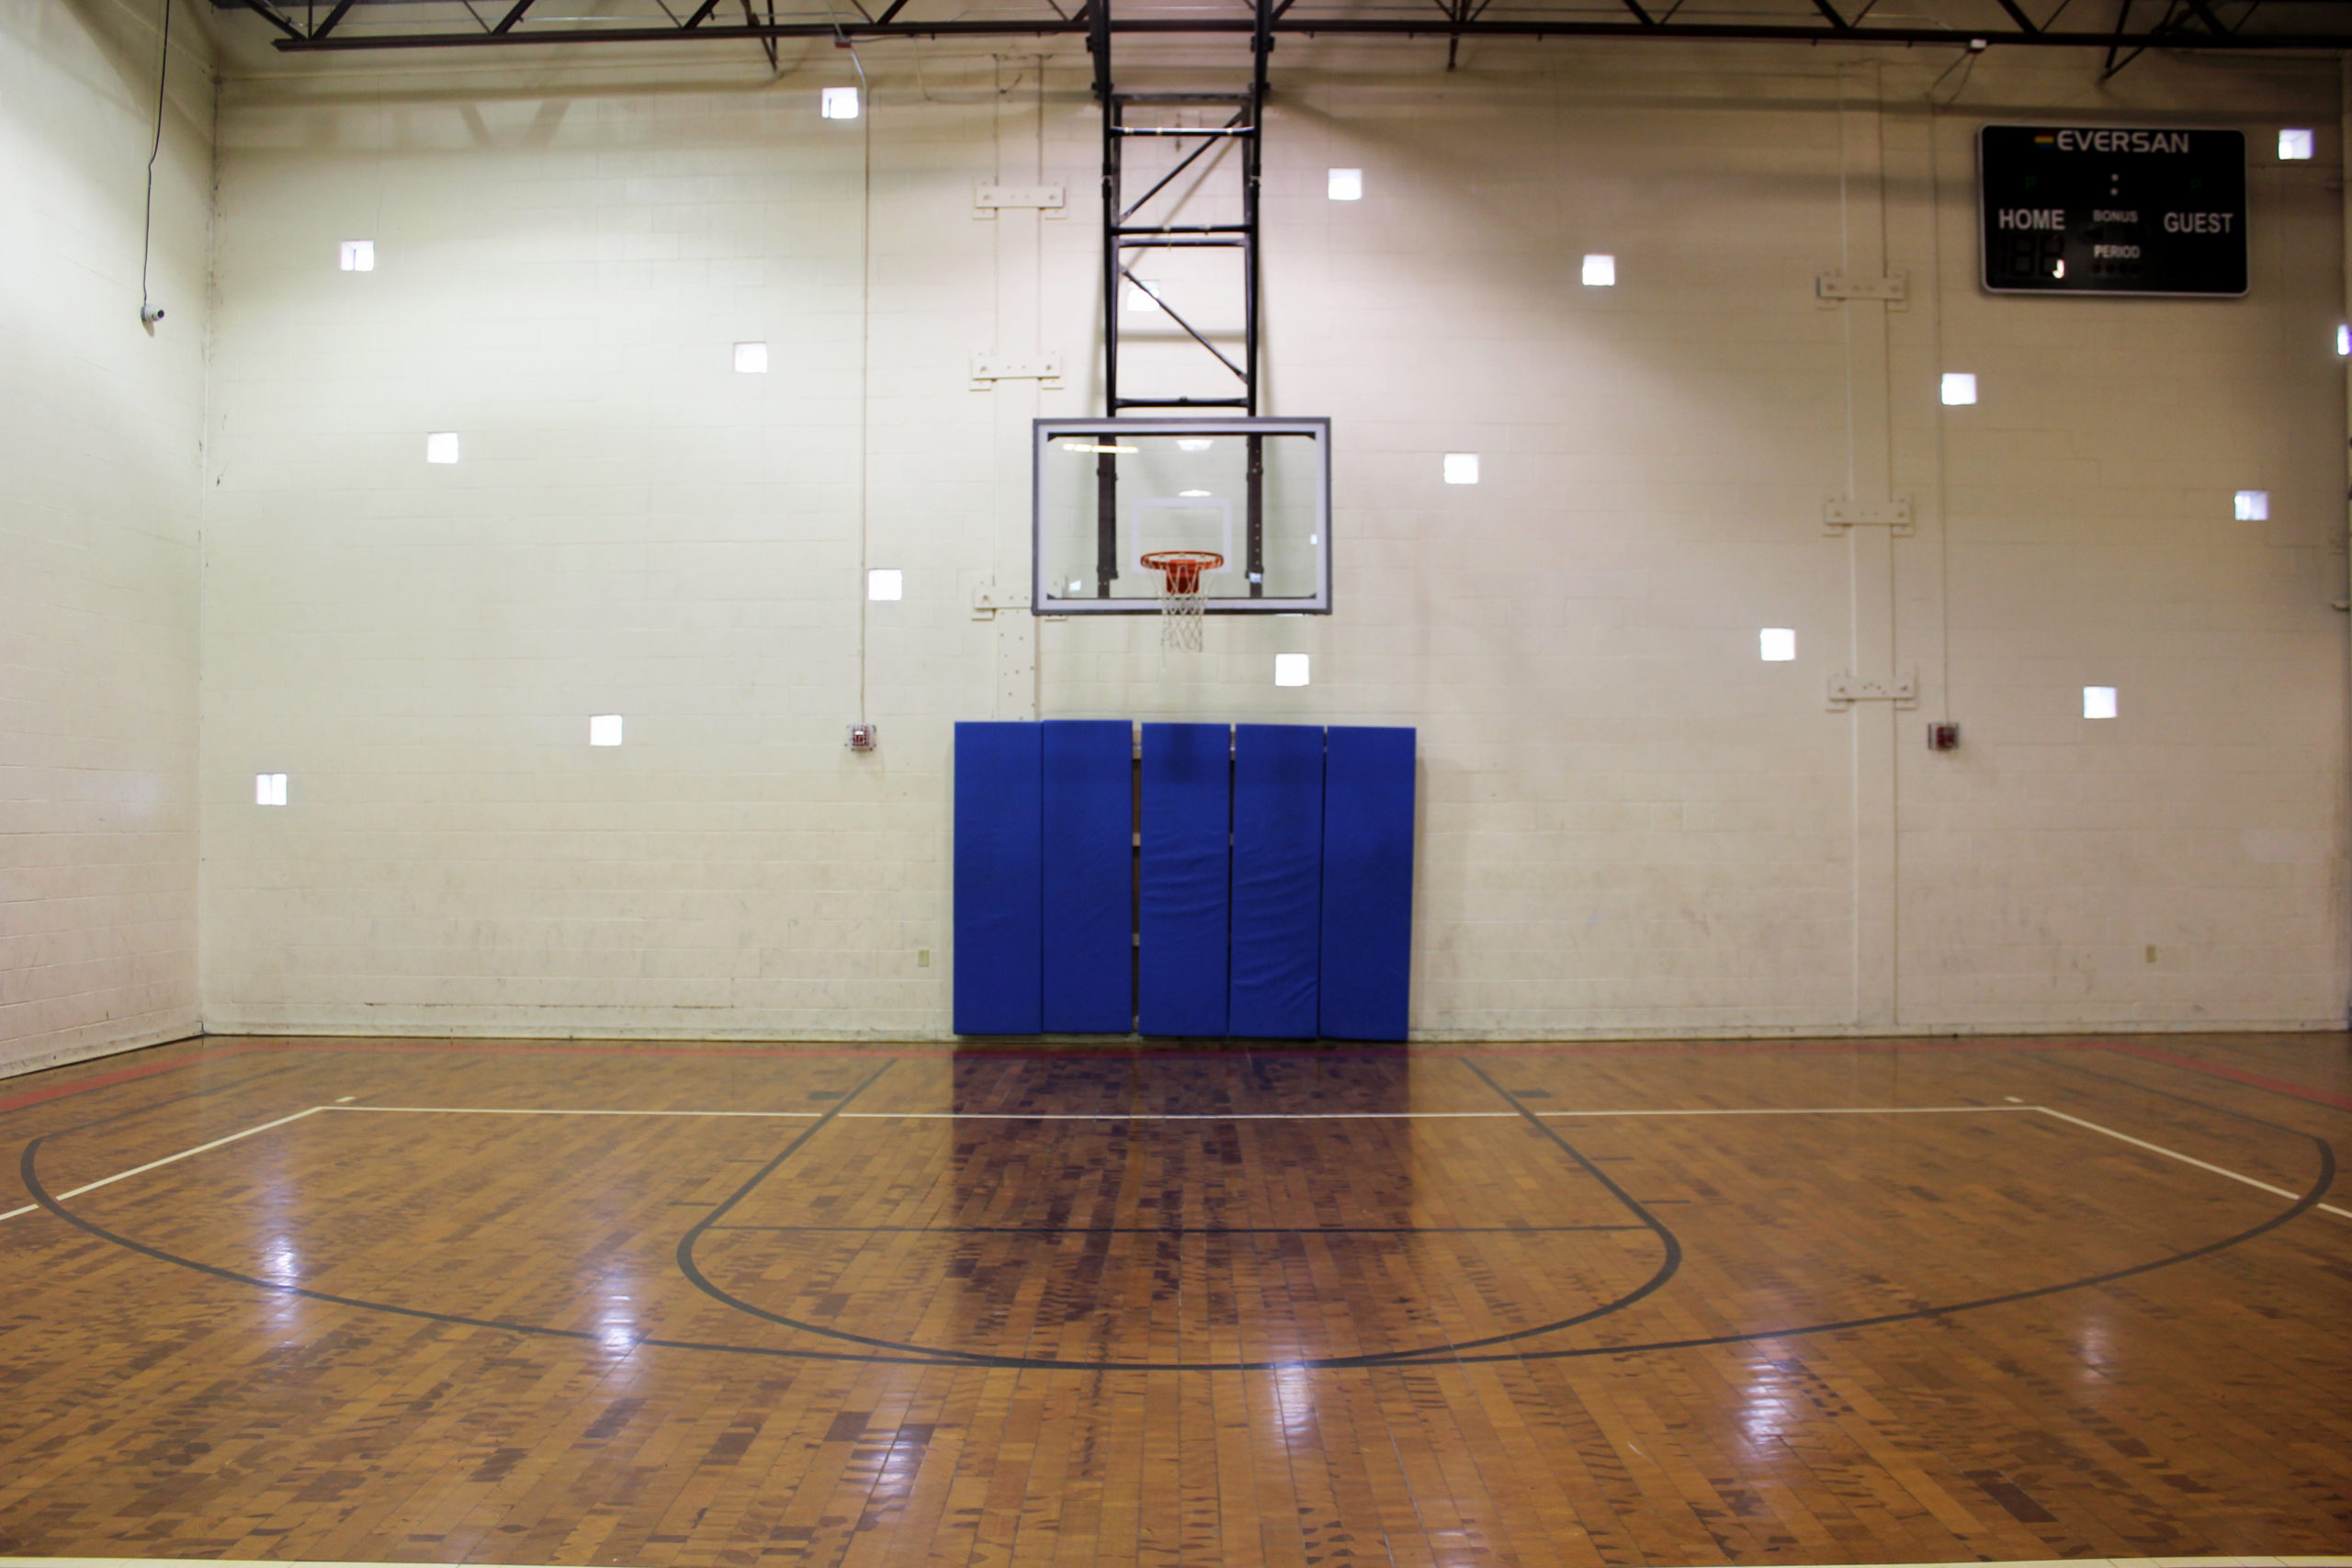 Basketball hoop in the old Boys' Village gym